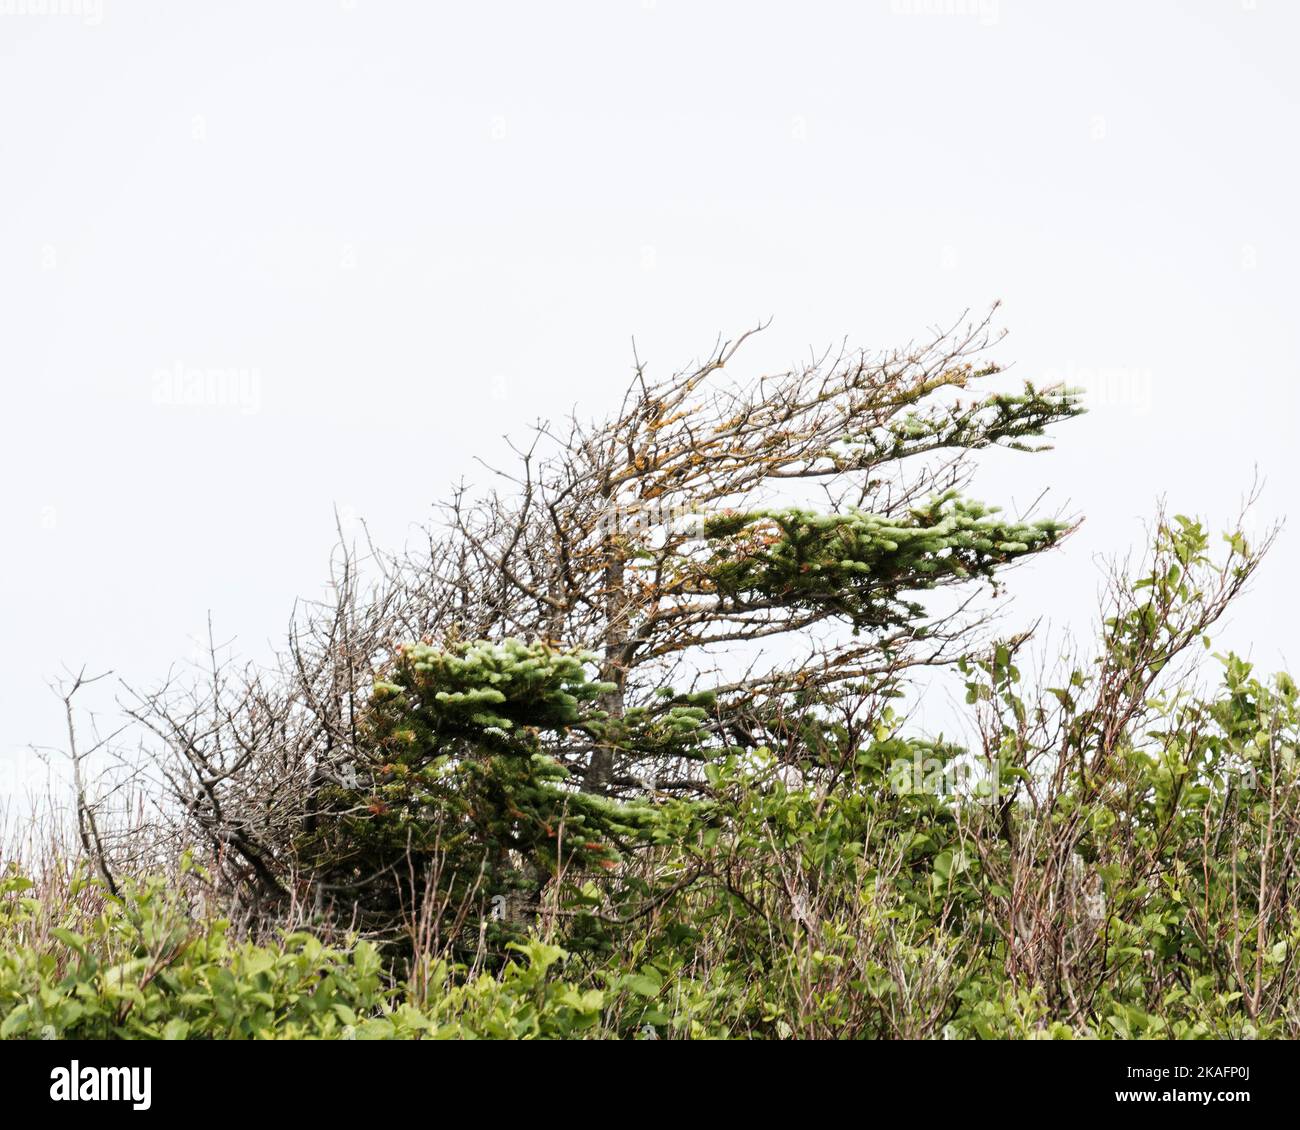 A deformed spruce tree, tuckamore, caused by strong ocean winds are a common sight in coastal Newfoundland and Labrador, Canada. Stock Photo